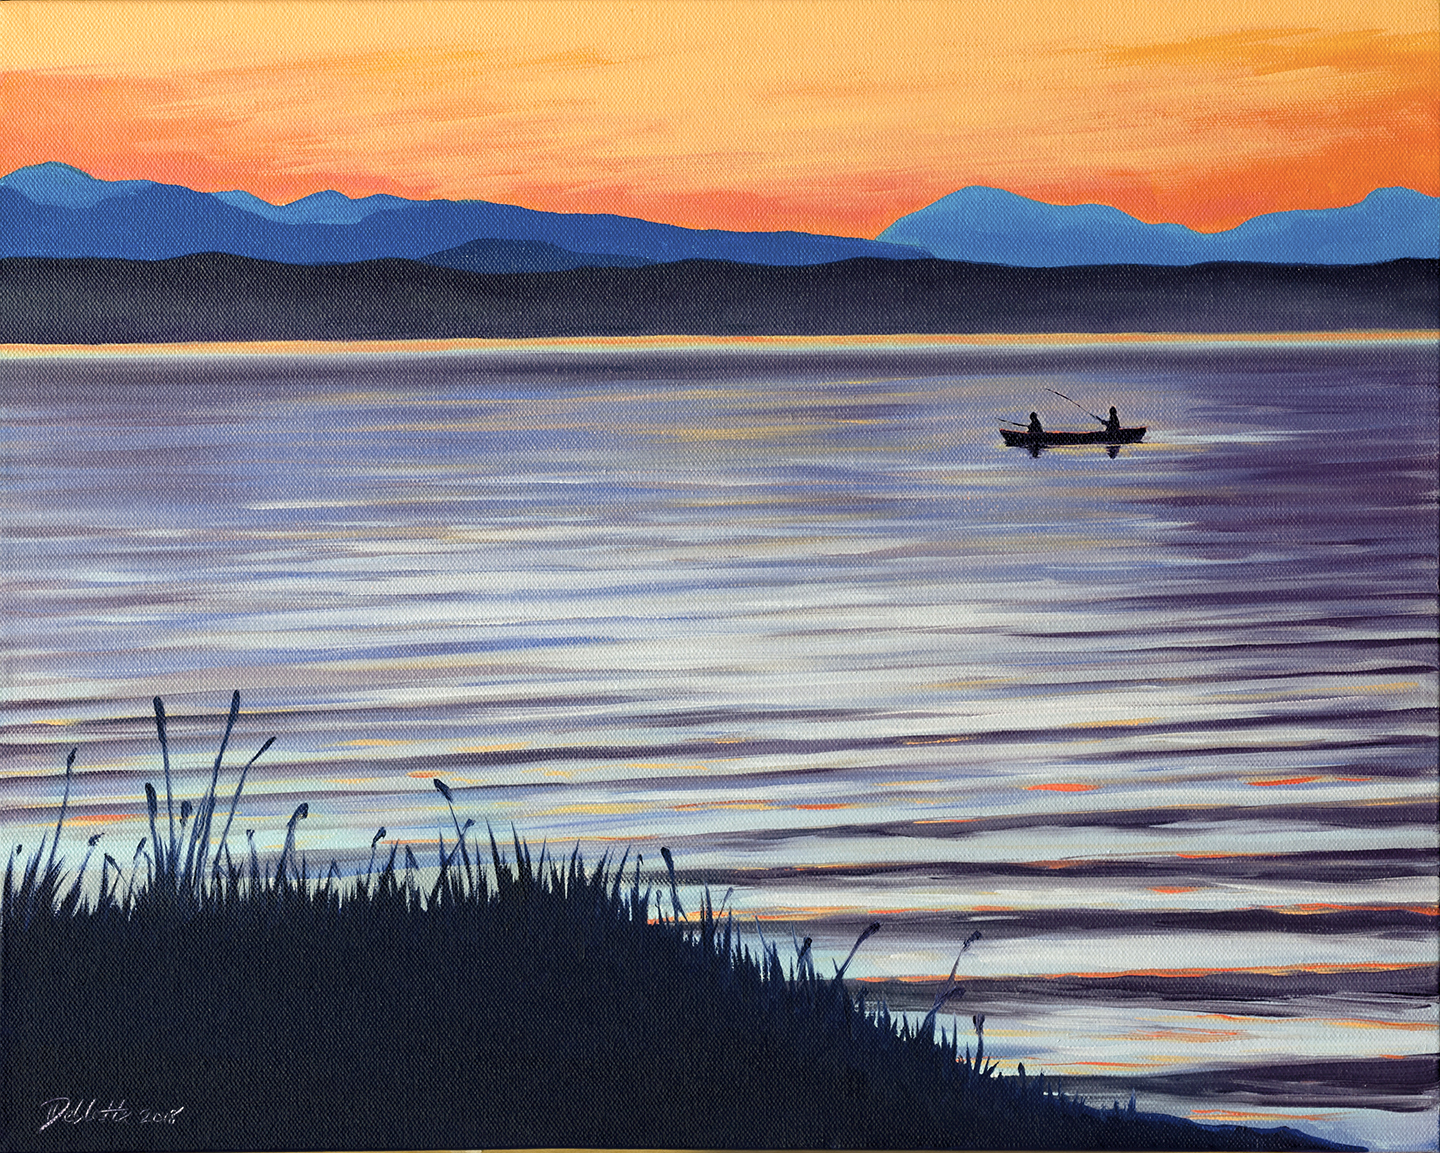 DAINA DEBLETTE "Last Catch of the Day" oil on canvas $400